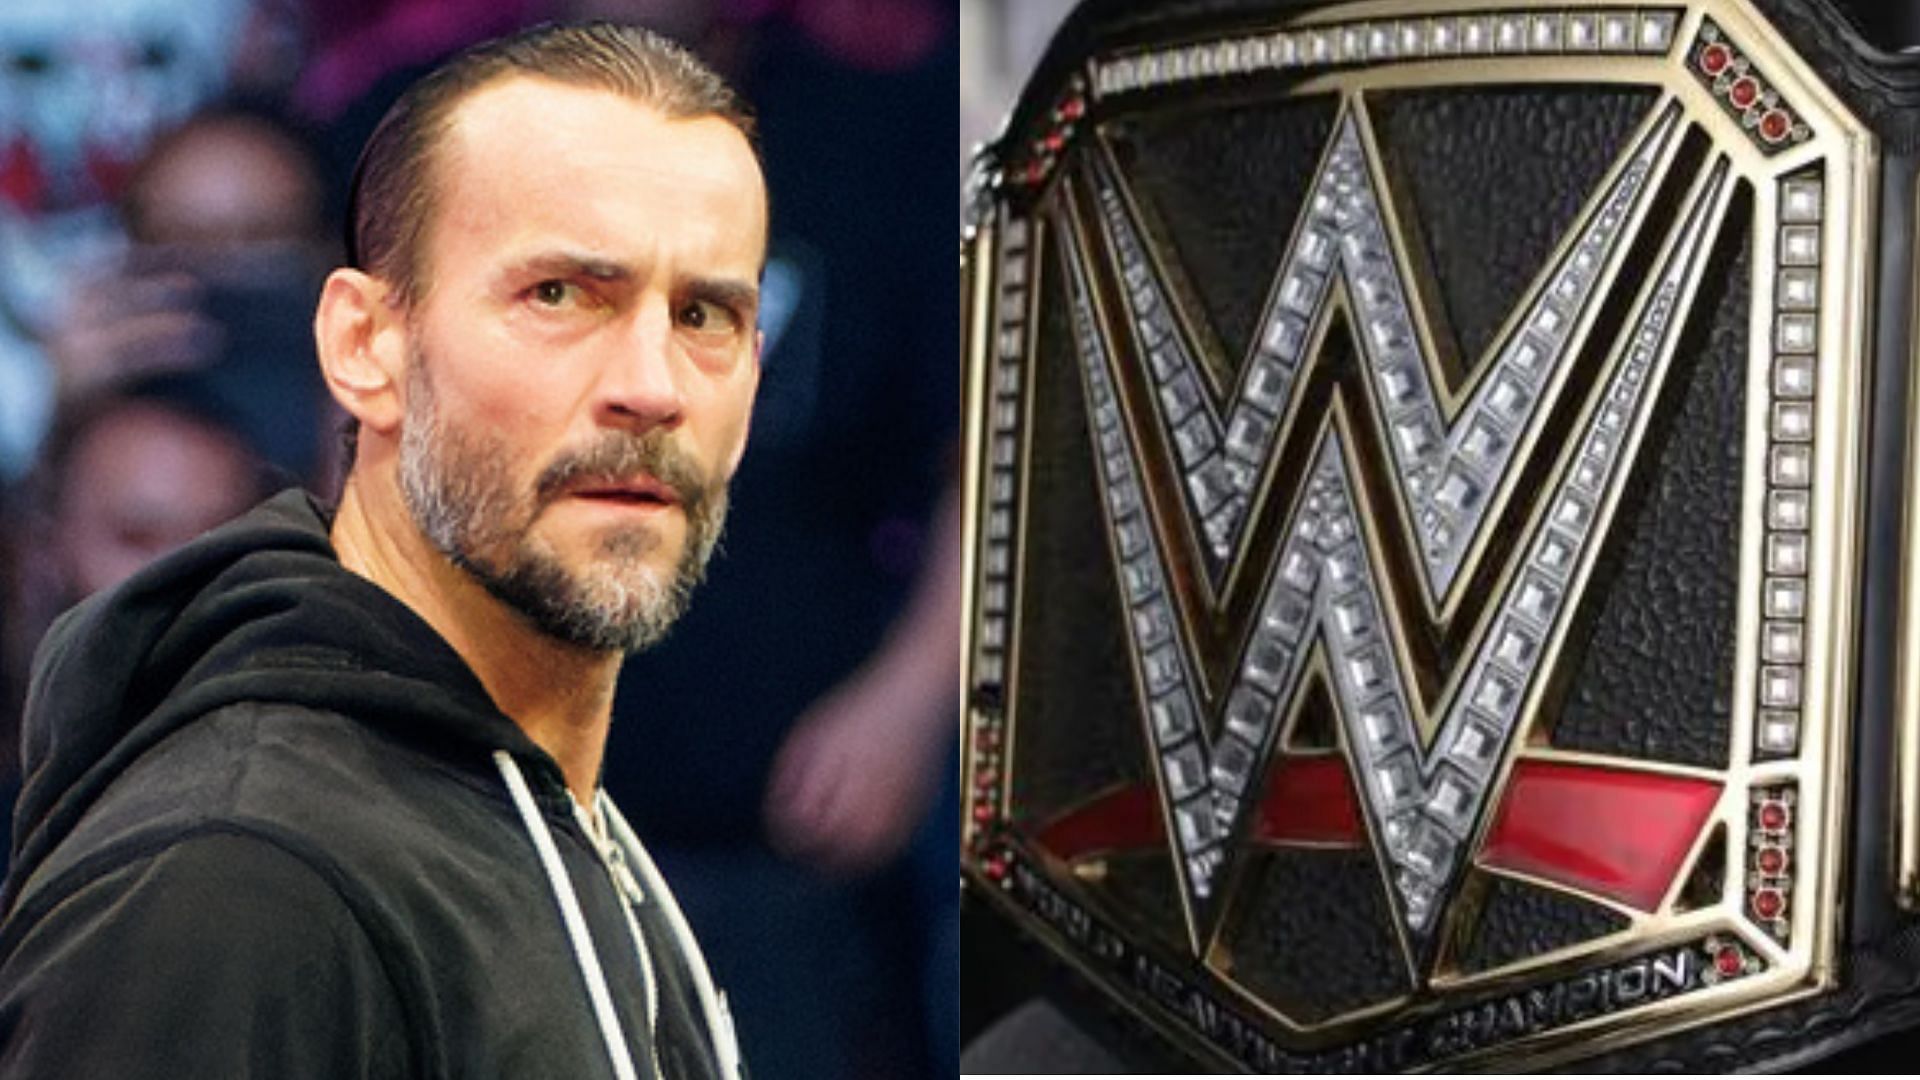 CM Punk should return to AEW to retire a former WWE Champion